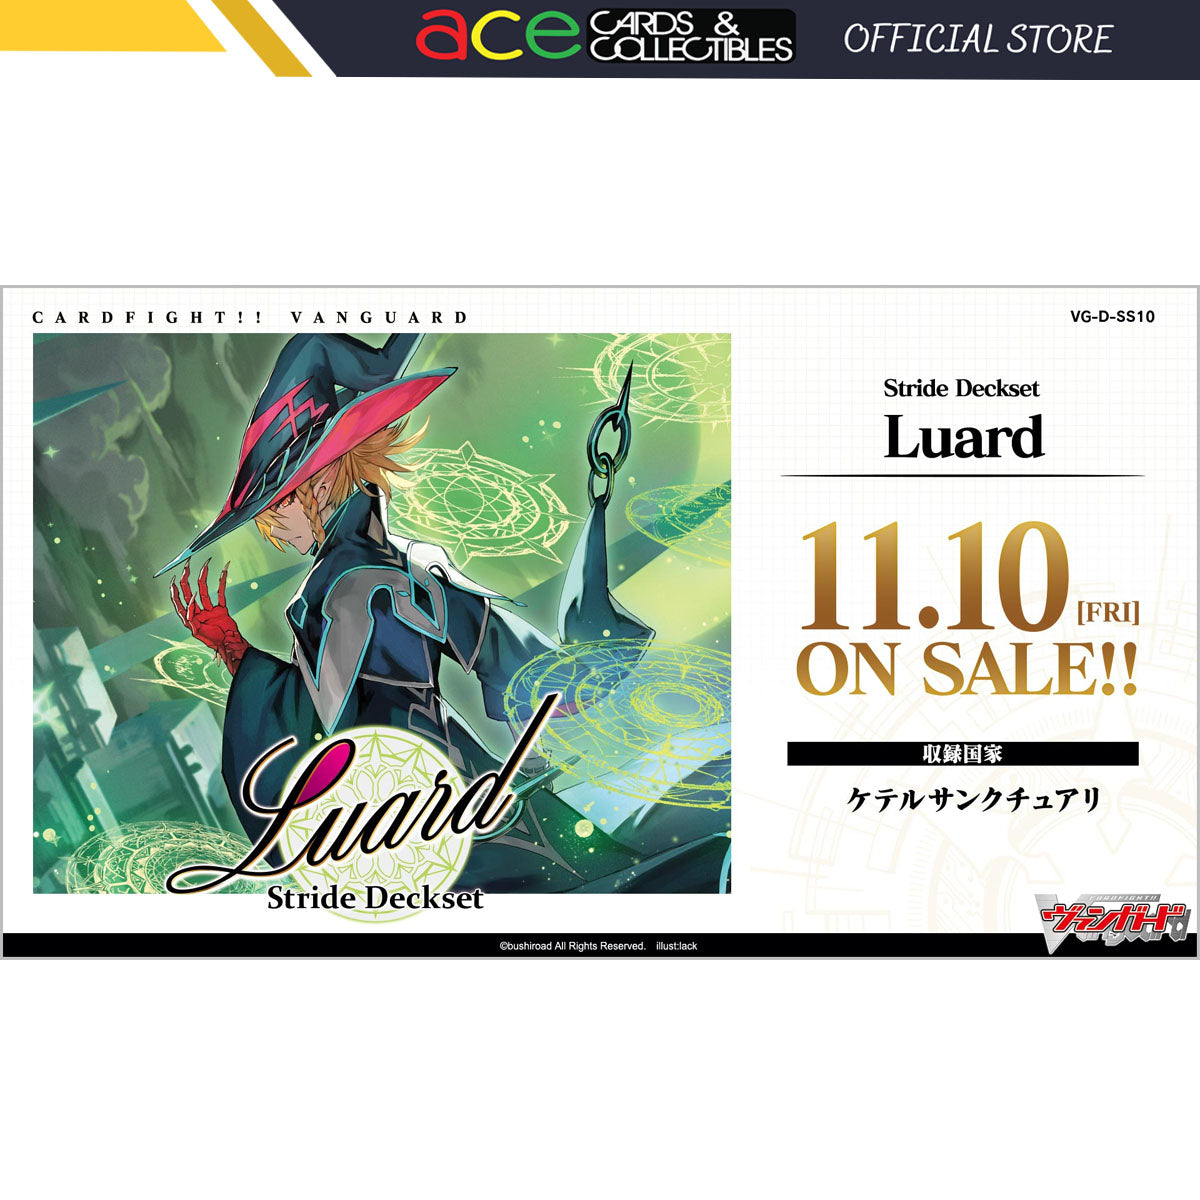 Cardfight!! Vanguard OverDress Special Series Vol. 10 &quot;Stride Deckset Luard&quot; [VG-D-SS10] (Japanese)-Bushiroad-Ace Cards &amp; Collectibles